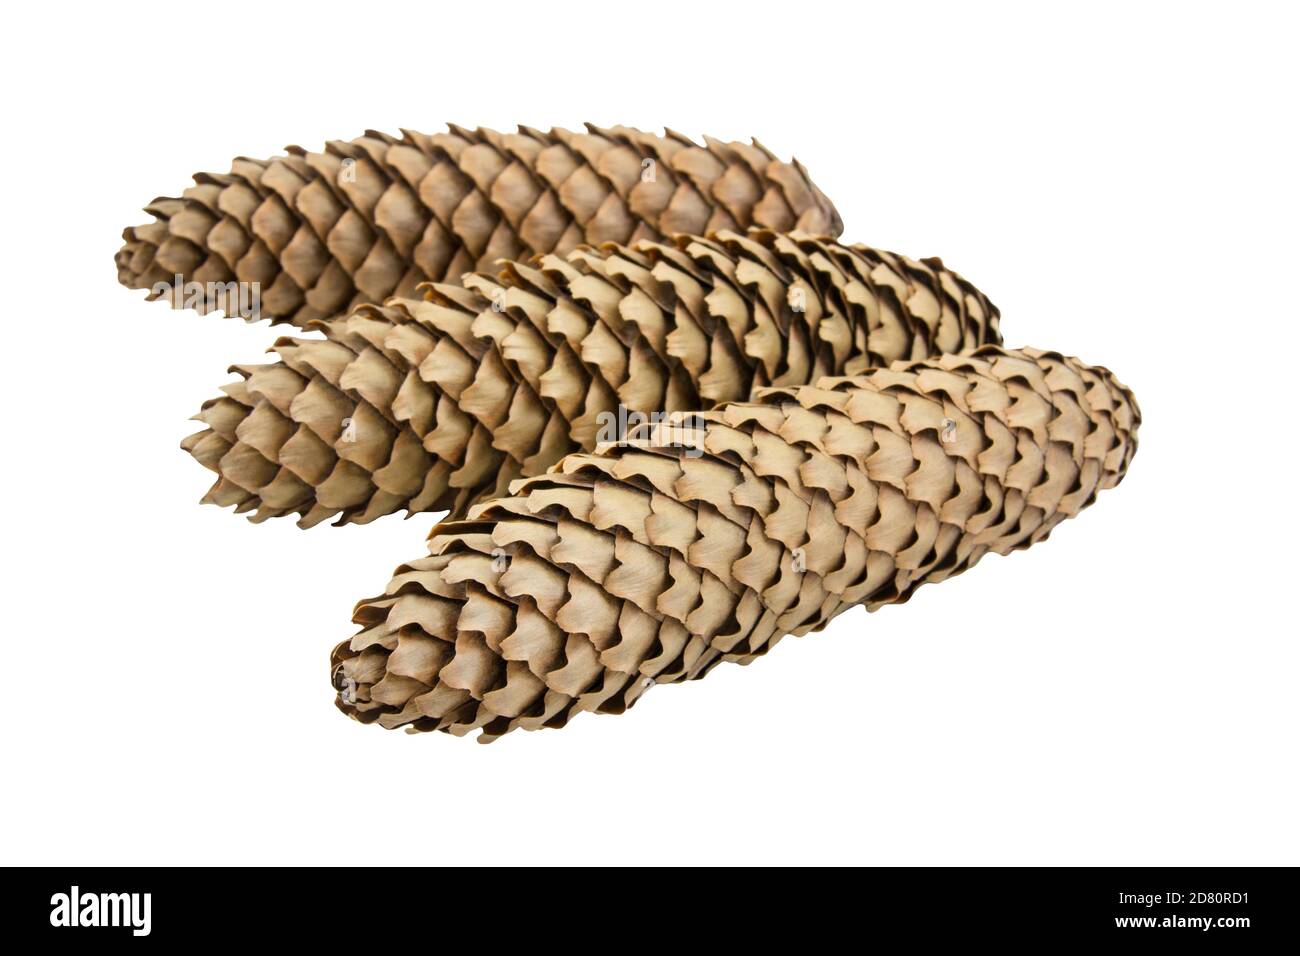 Three spruce tree cones isolated against white background Stock Photo